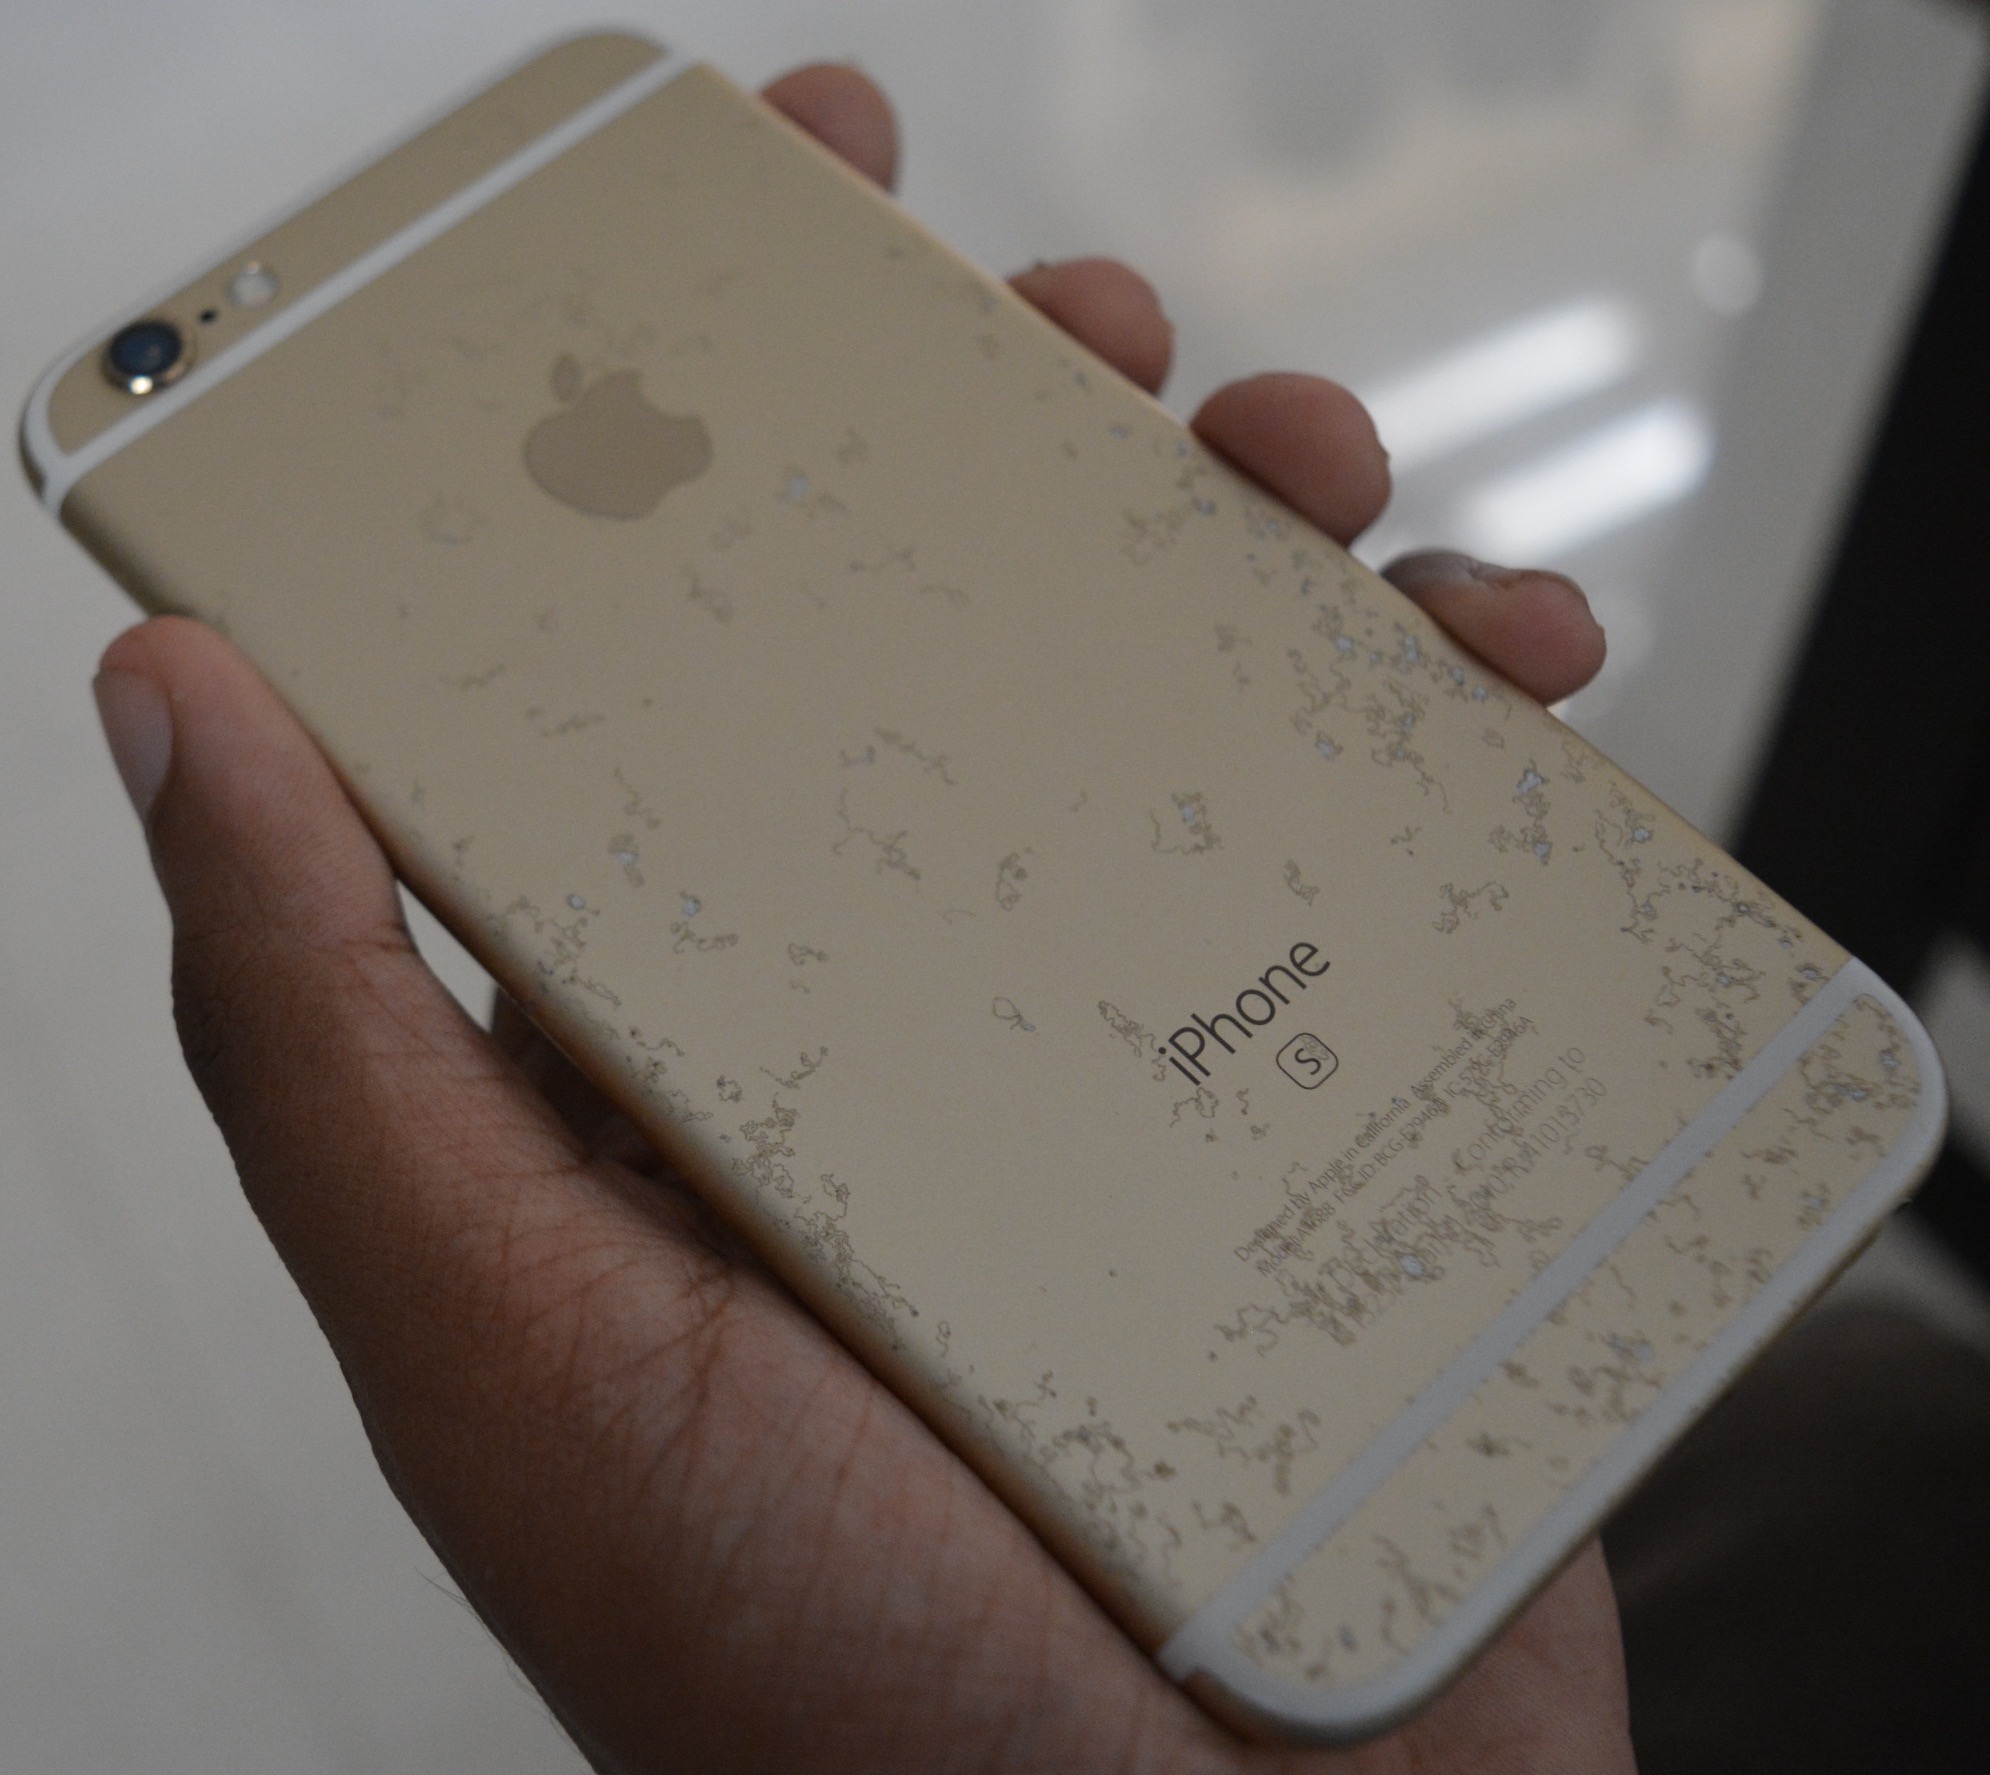 After not getting support from Apple, owners of iPhones 6s that have oxidized are going to court